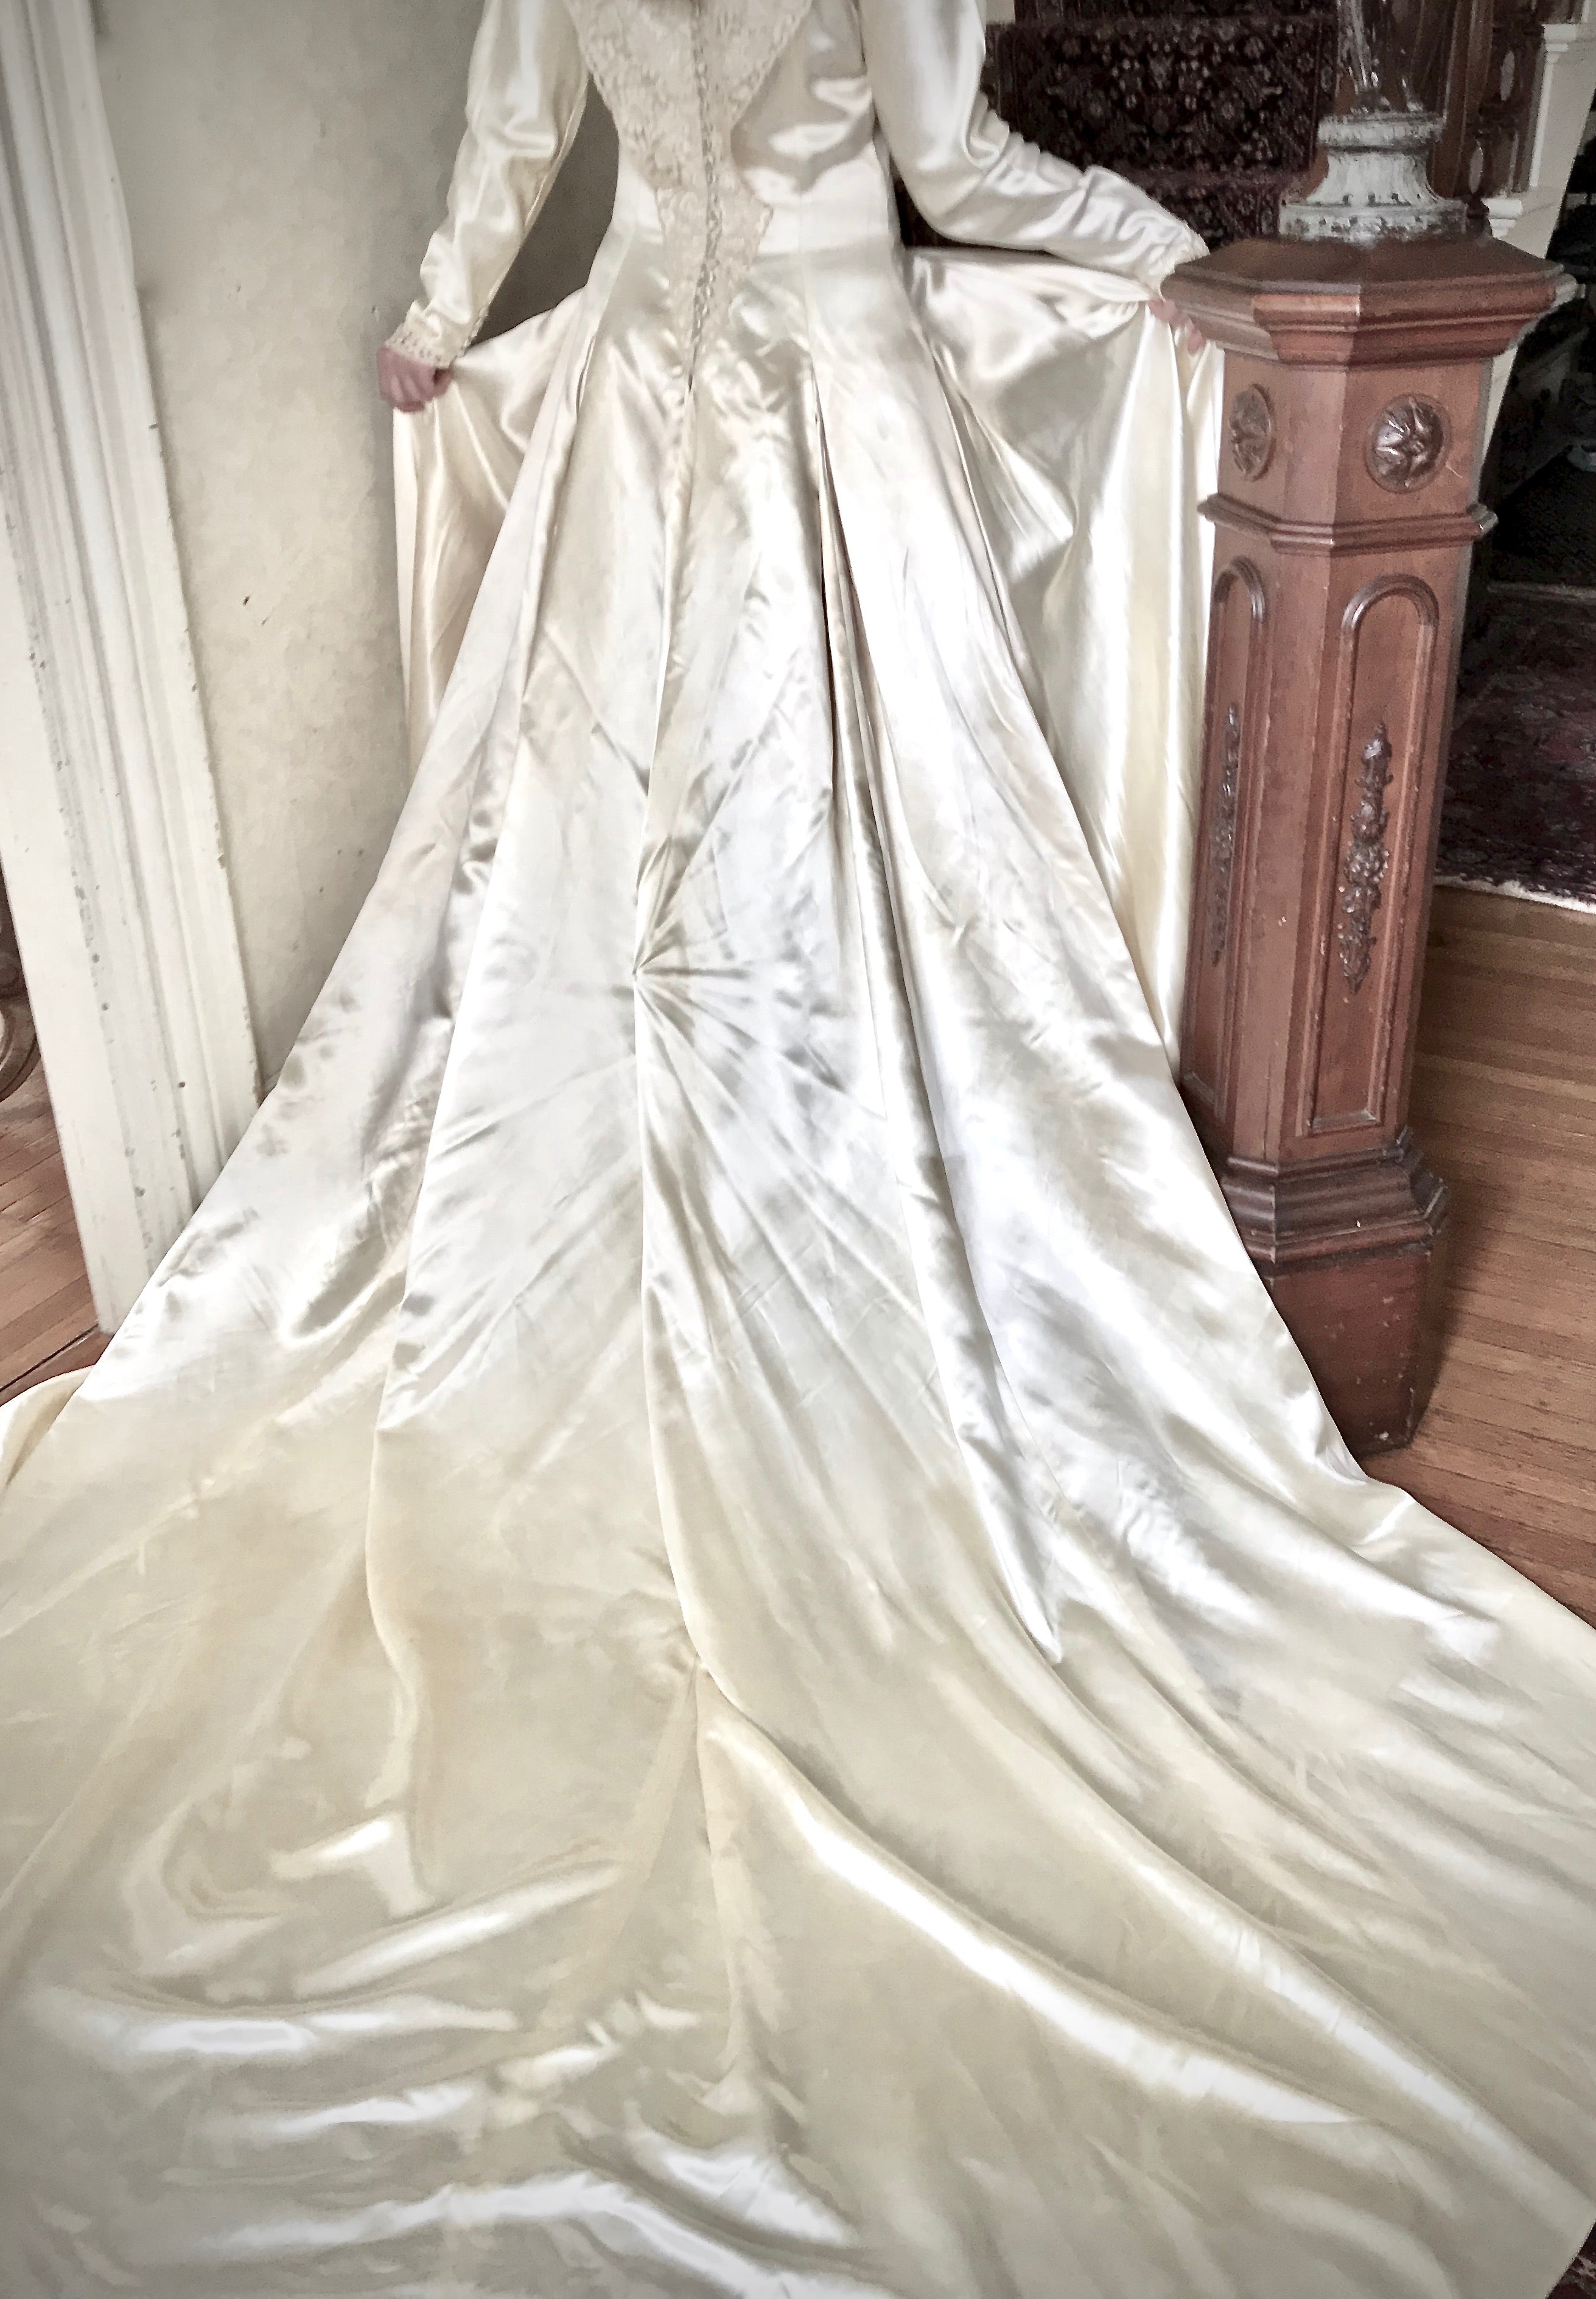 Vintage 1940’s Glamour, A Miriam of New York Original.  Ivory Liquid Satin & Lace Bias-Cut Fitted & Flared Gown.   A-Line Silhouette with substantial "Monarch" train